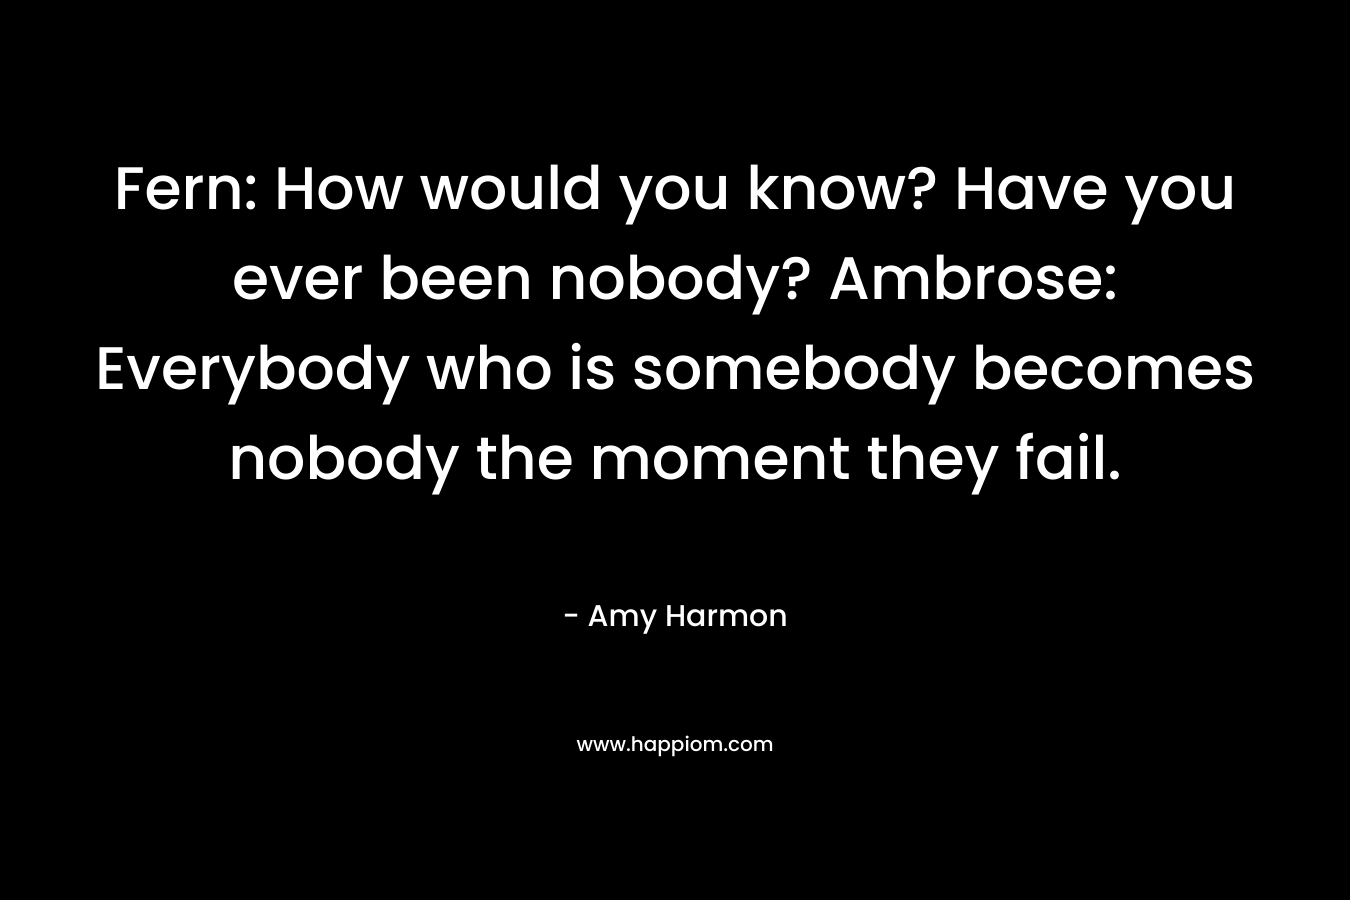 Fern: How would you know? Have you ever been nobody? Ambrose: Everybody who is somebody becomes nobody the moment they fail. – Amy Harmon